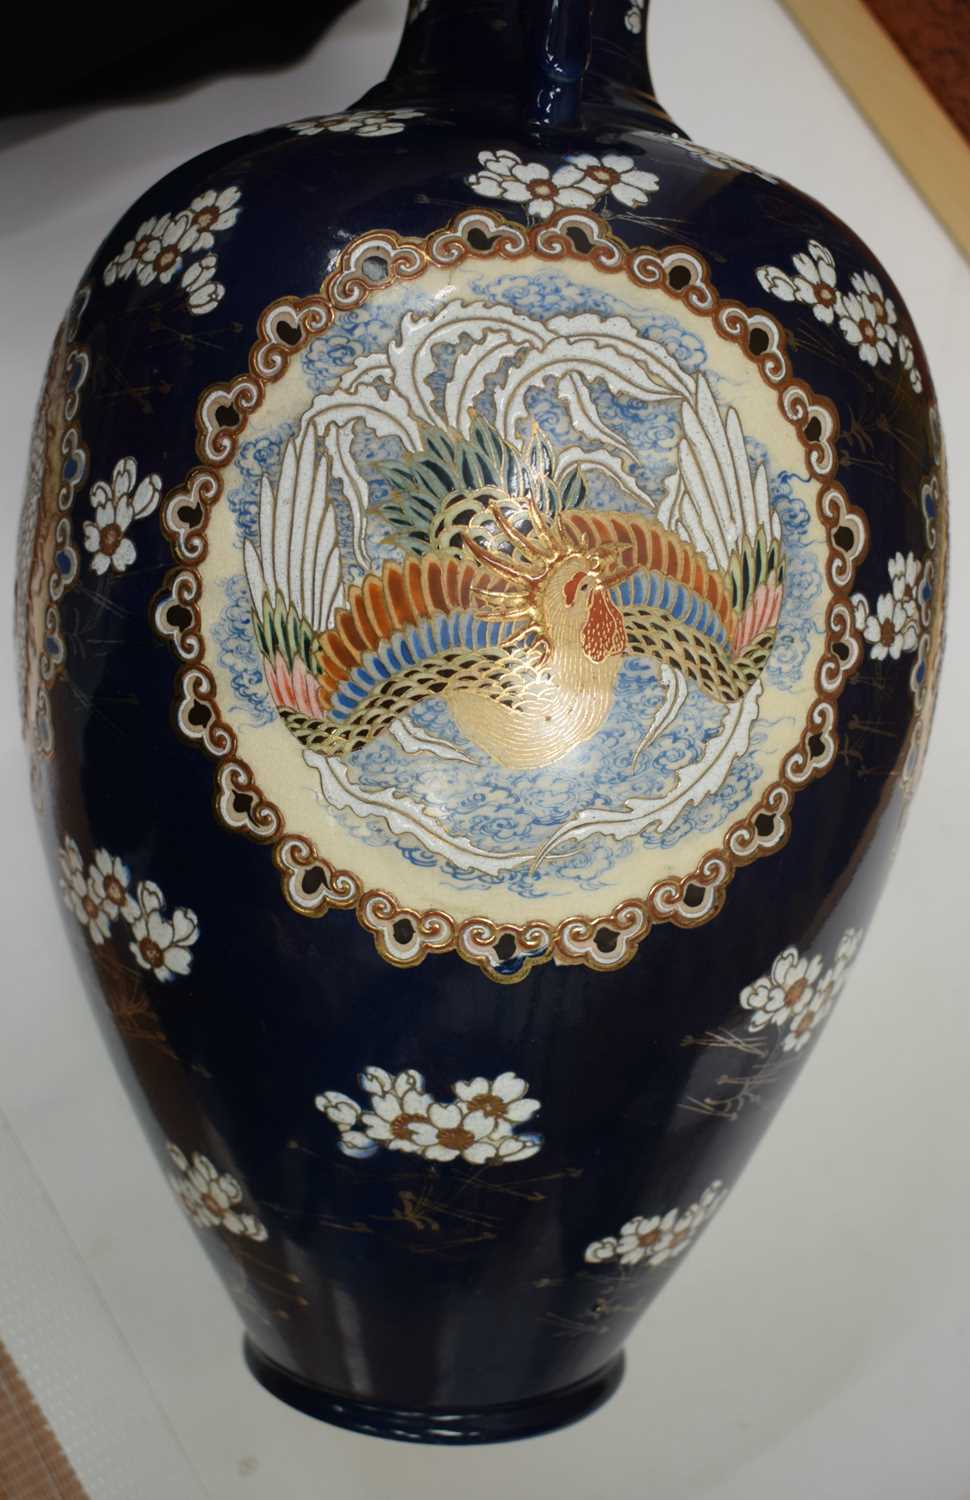 A LARGE PAIR OF LATE 19TH CENTURY JAPANESE MEIJI PERIOD SATSUMA VASES painted in relief with - Image 8 of 21